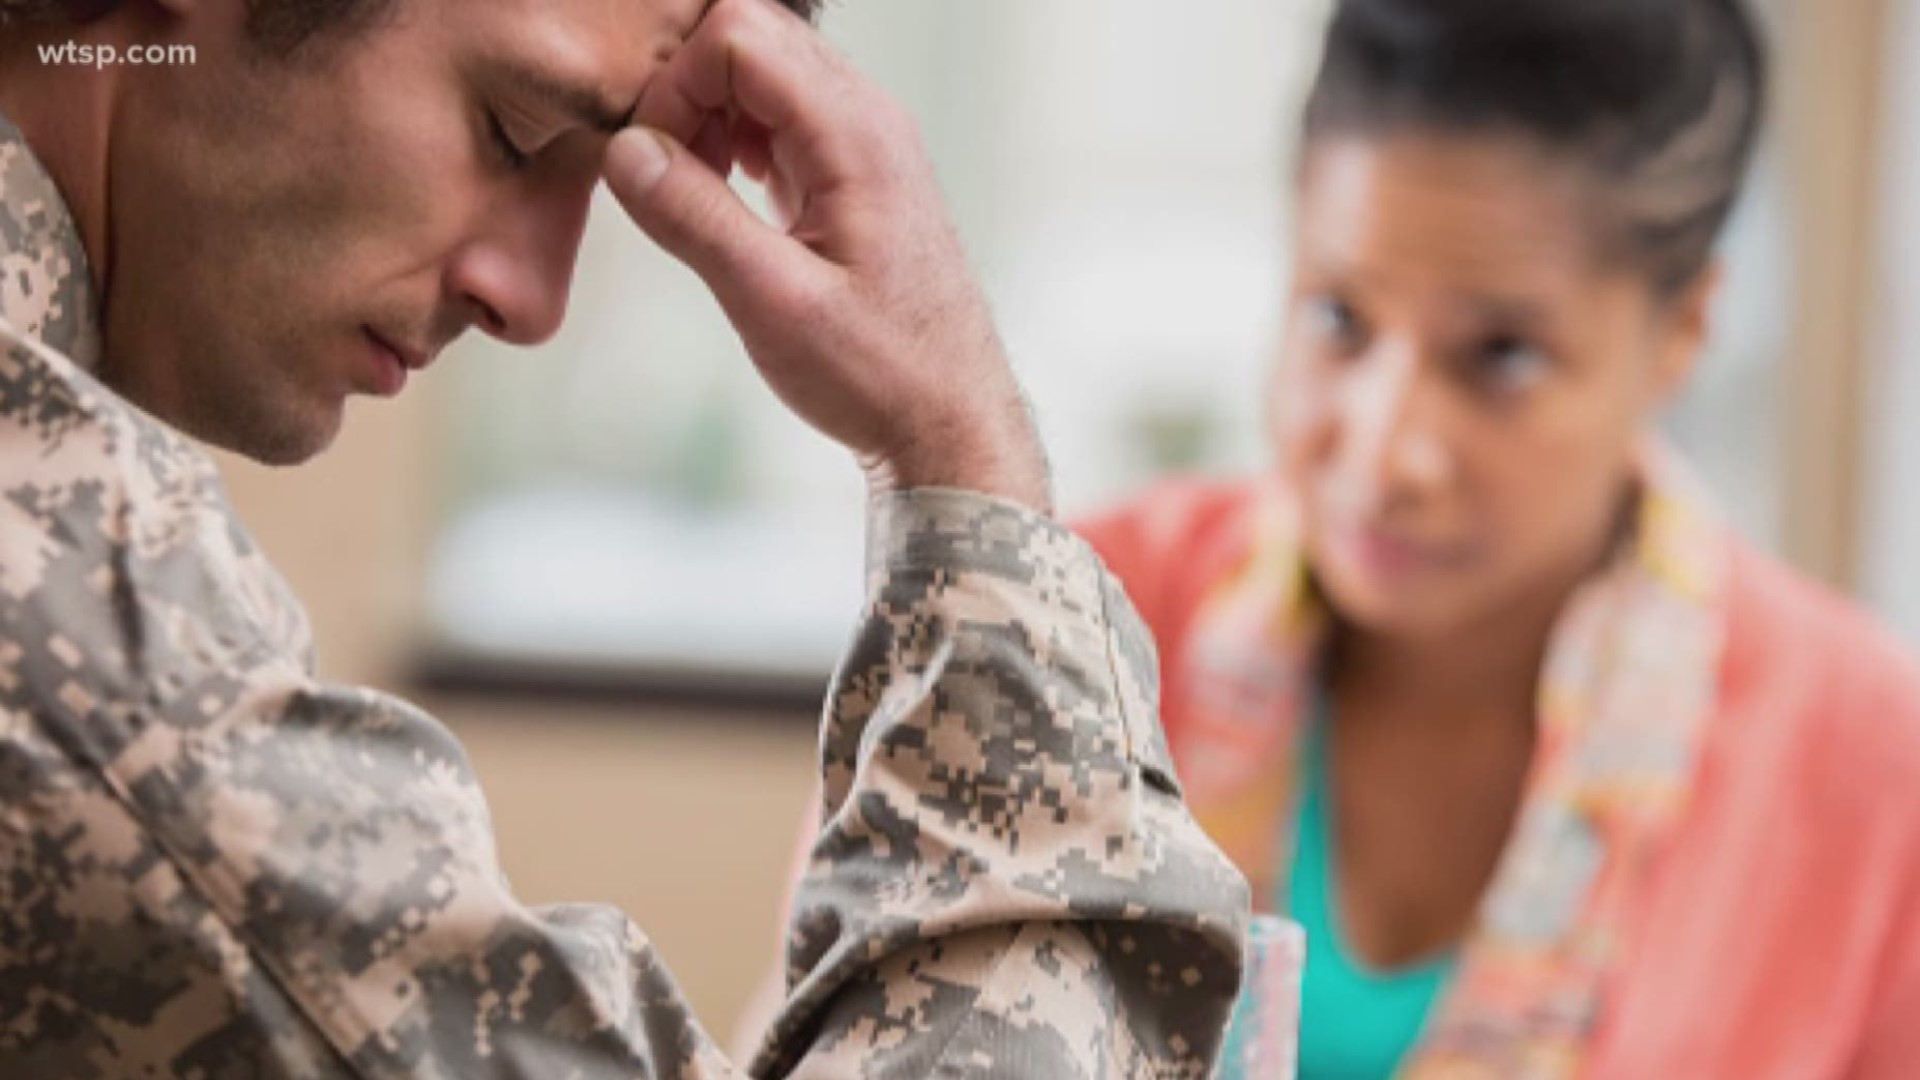 National PTSD Awareness Day is held each year on June 27. It is a day to recognize the effects post-traumatic stress has on the lives of those affected by it. https://on.wtsp.com/2YfWWCX